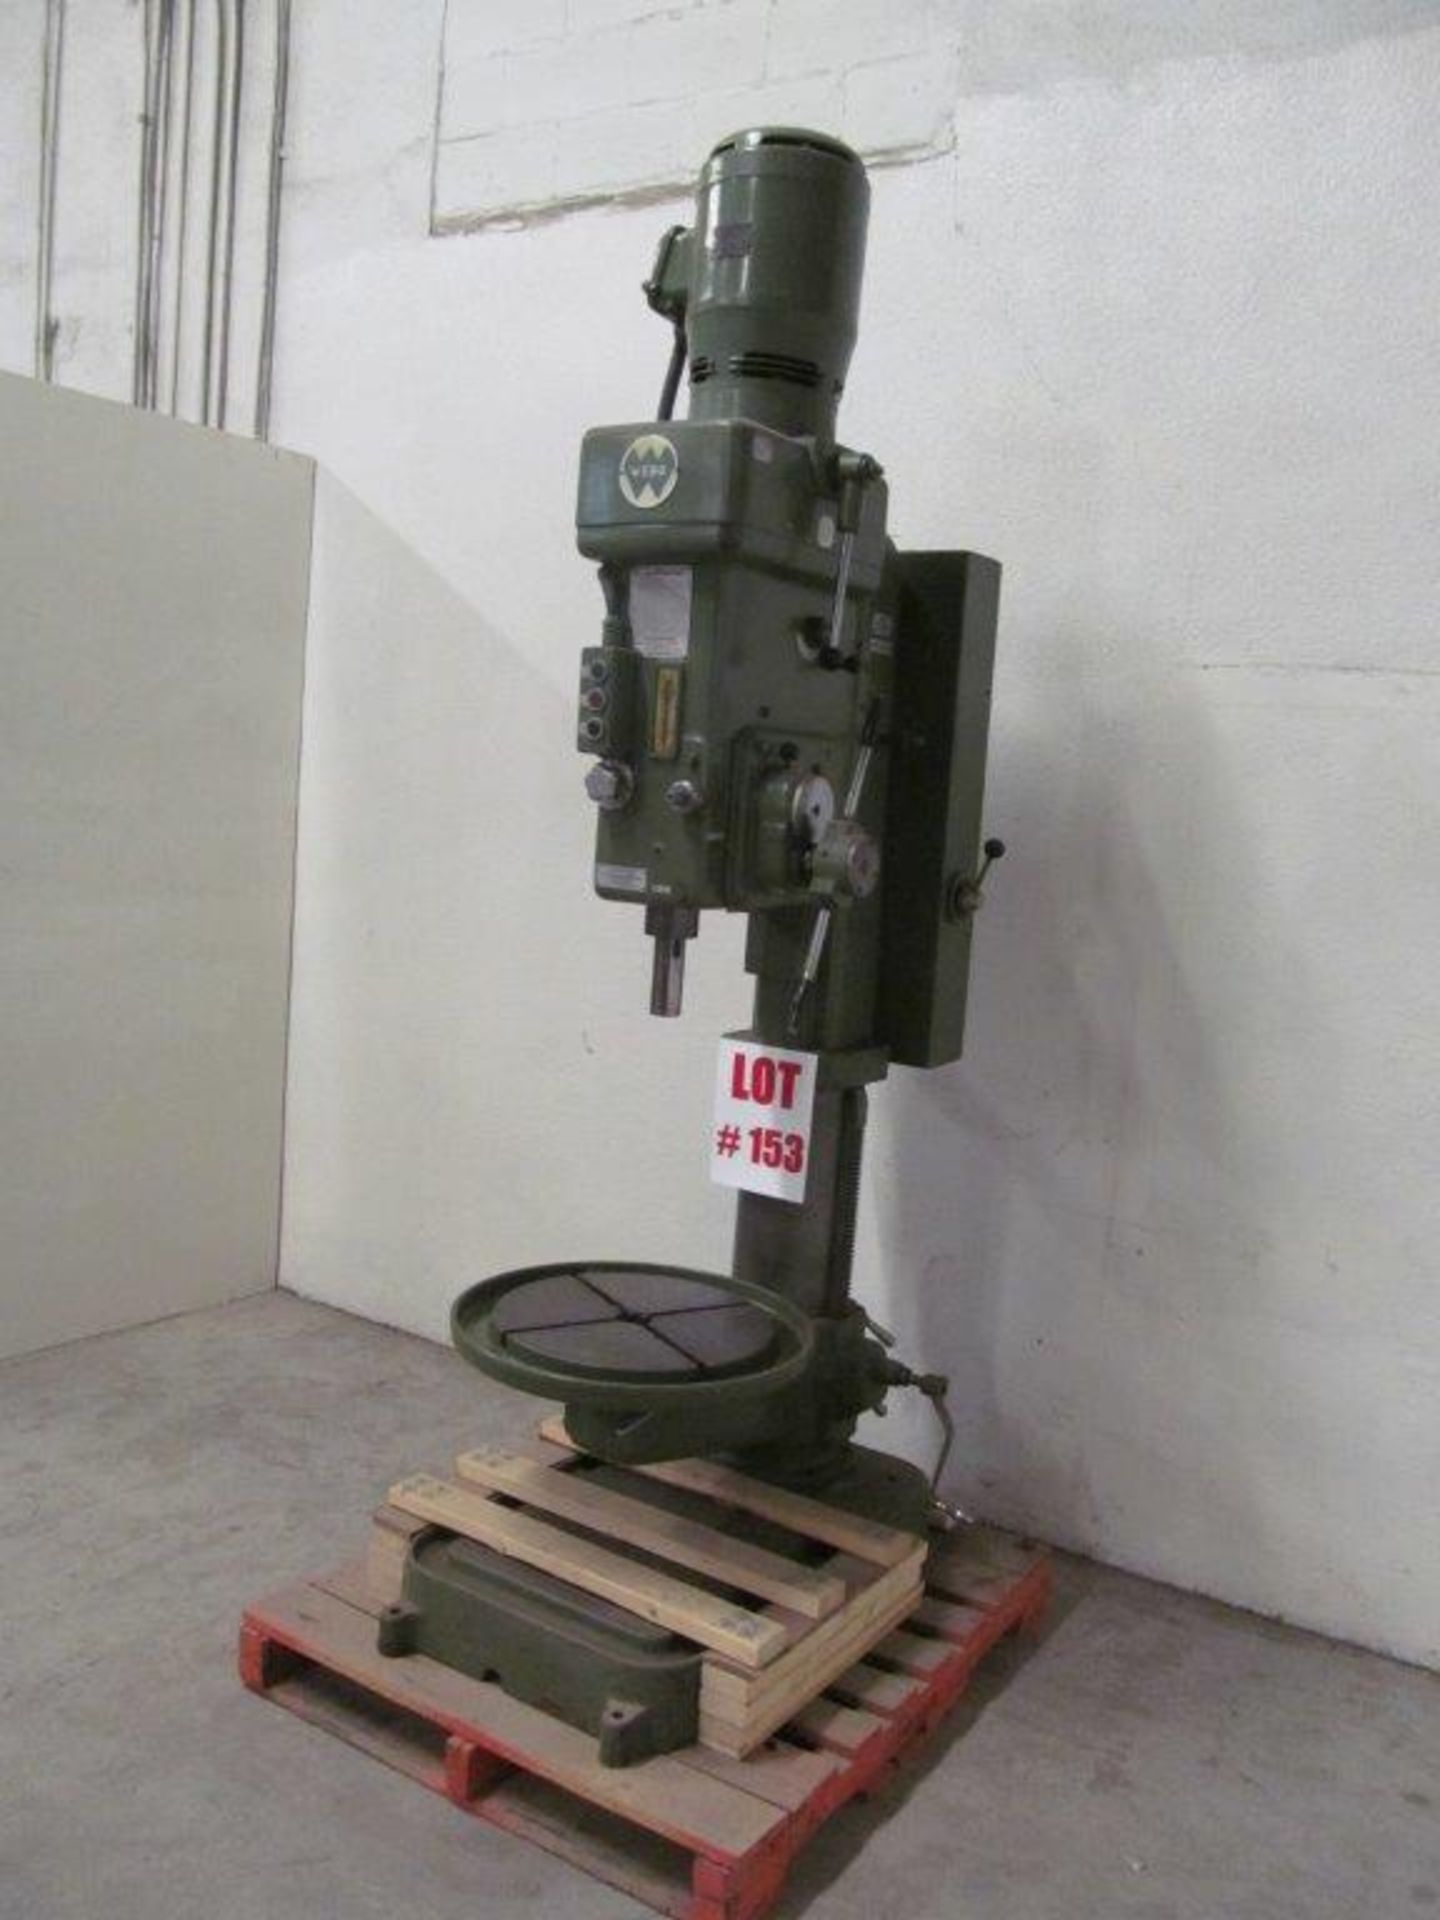 WEBCO (GERMANY) HEAVY DUTY PEDESTAL DRILL PRESS, MT 4 SPINDLE, ELECTRICS 575V/3PH/60C - Image 3 of 6